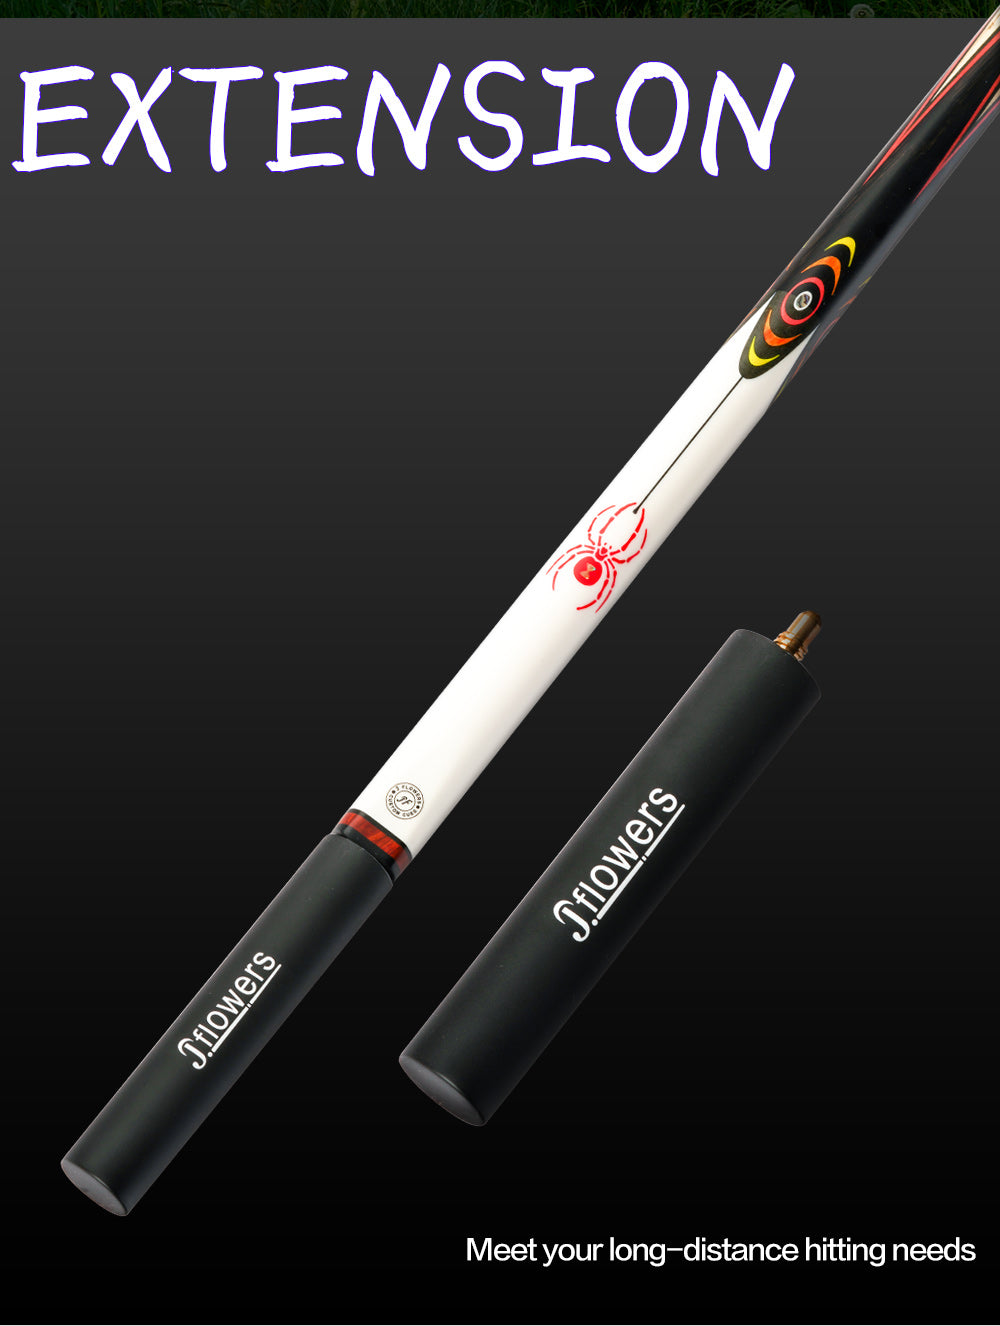 Jflowers Blood Spider Billiard One Piece Snooker Cue North American Ash Wood Real Inlay Black Technology Snooker with Extension